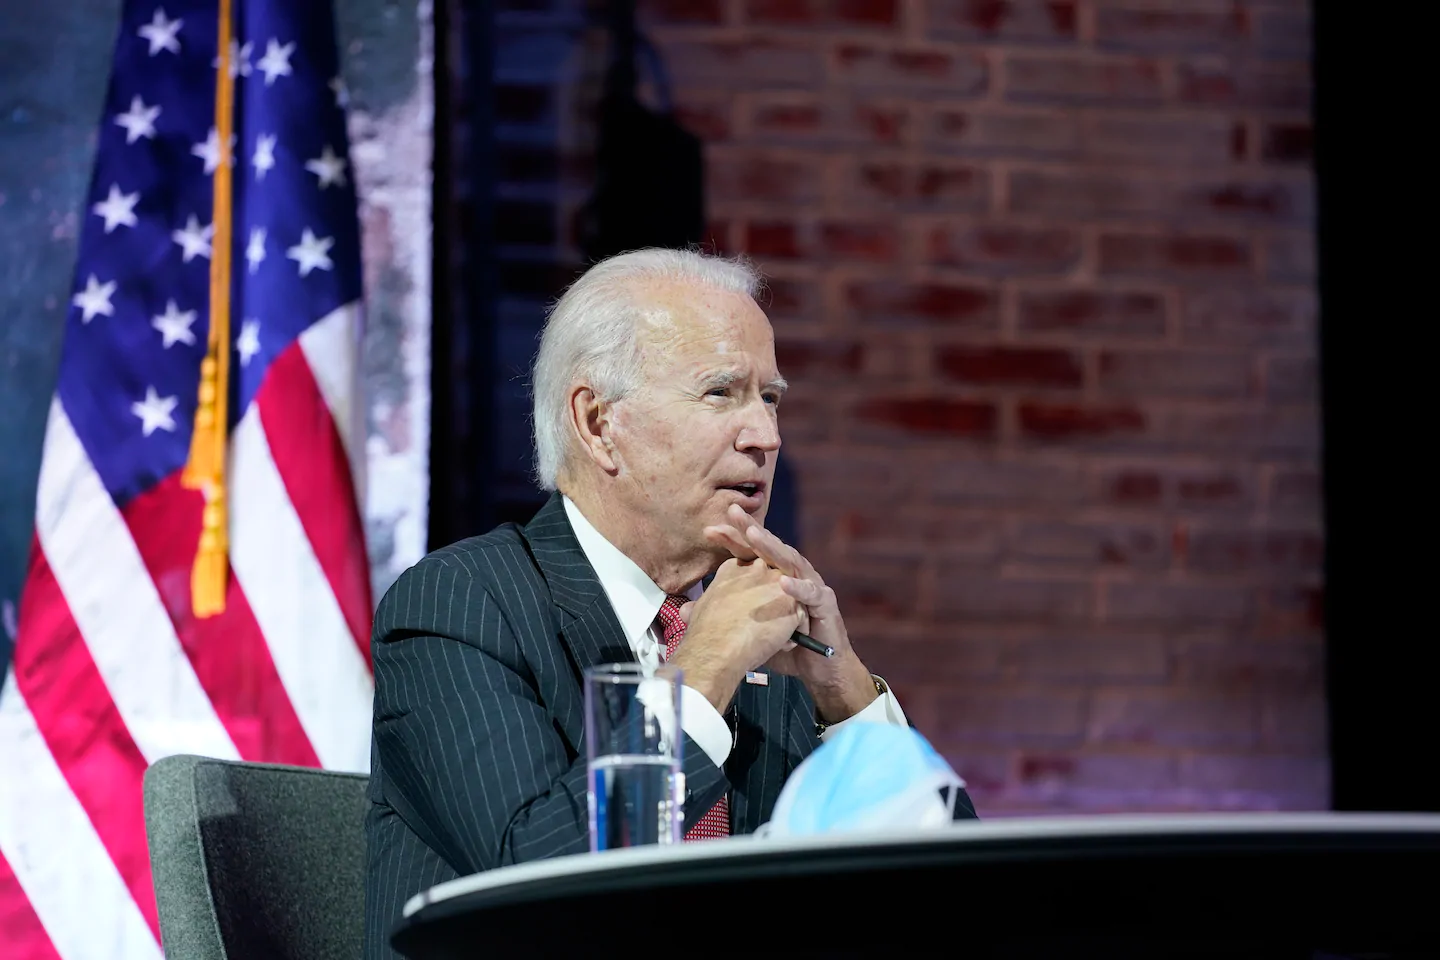 Biden transition live updates: Biden to meet with top Democrats in Congress as Trump presses bid to reverse election results